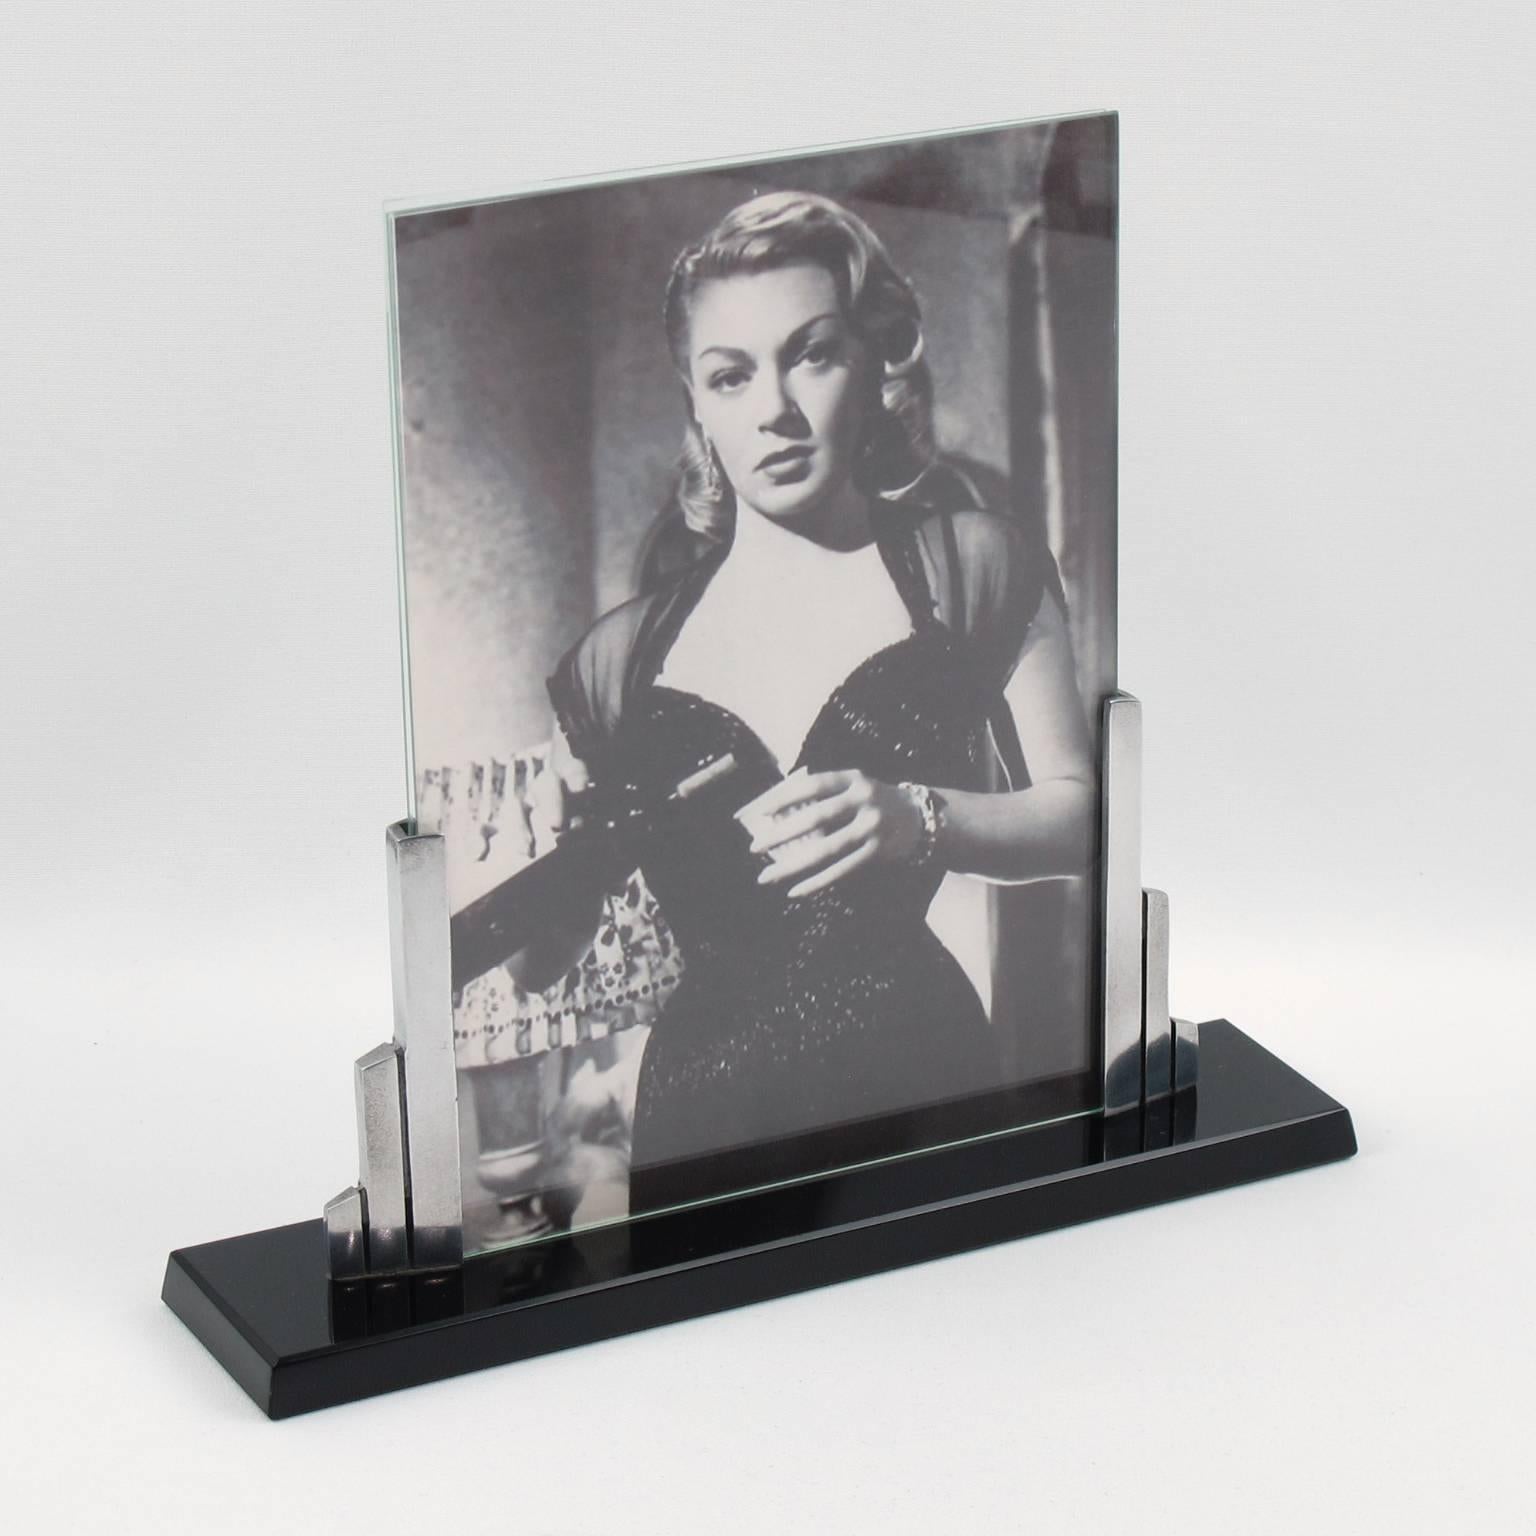 Elegant French Art Deco picture photo frame. Featuring thick black opaline glass plinth compliment with two polished chromed metal holders in skyscraper shape. The frame is complete with its two glass sheets to enclose the photograph. Excellent